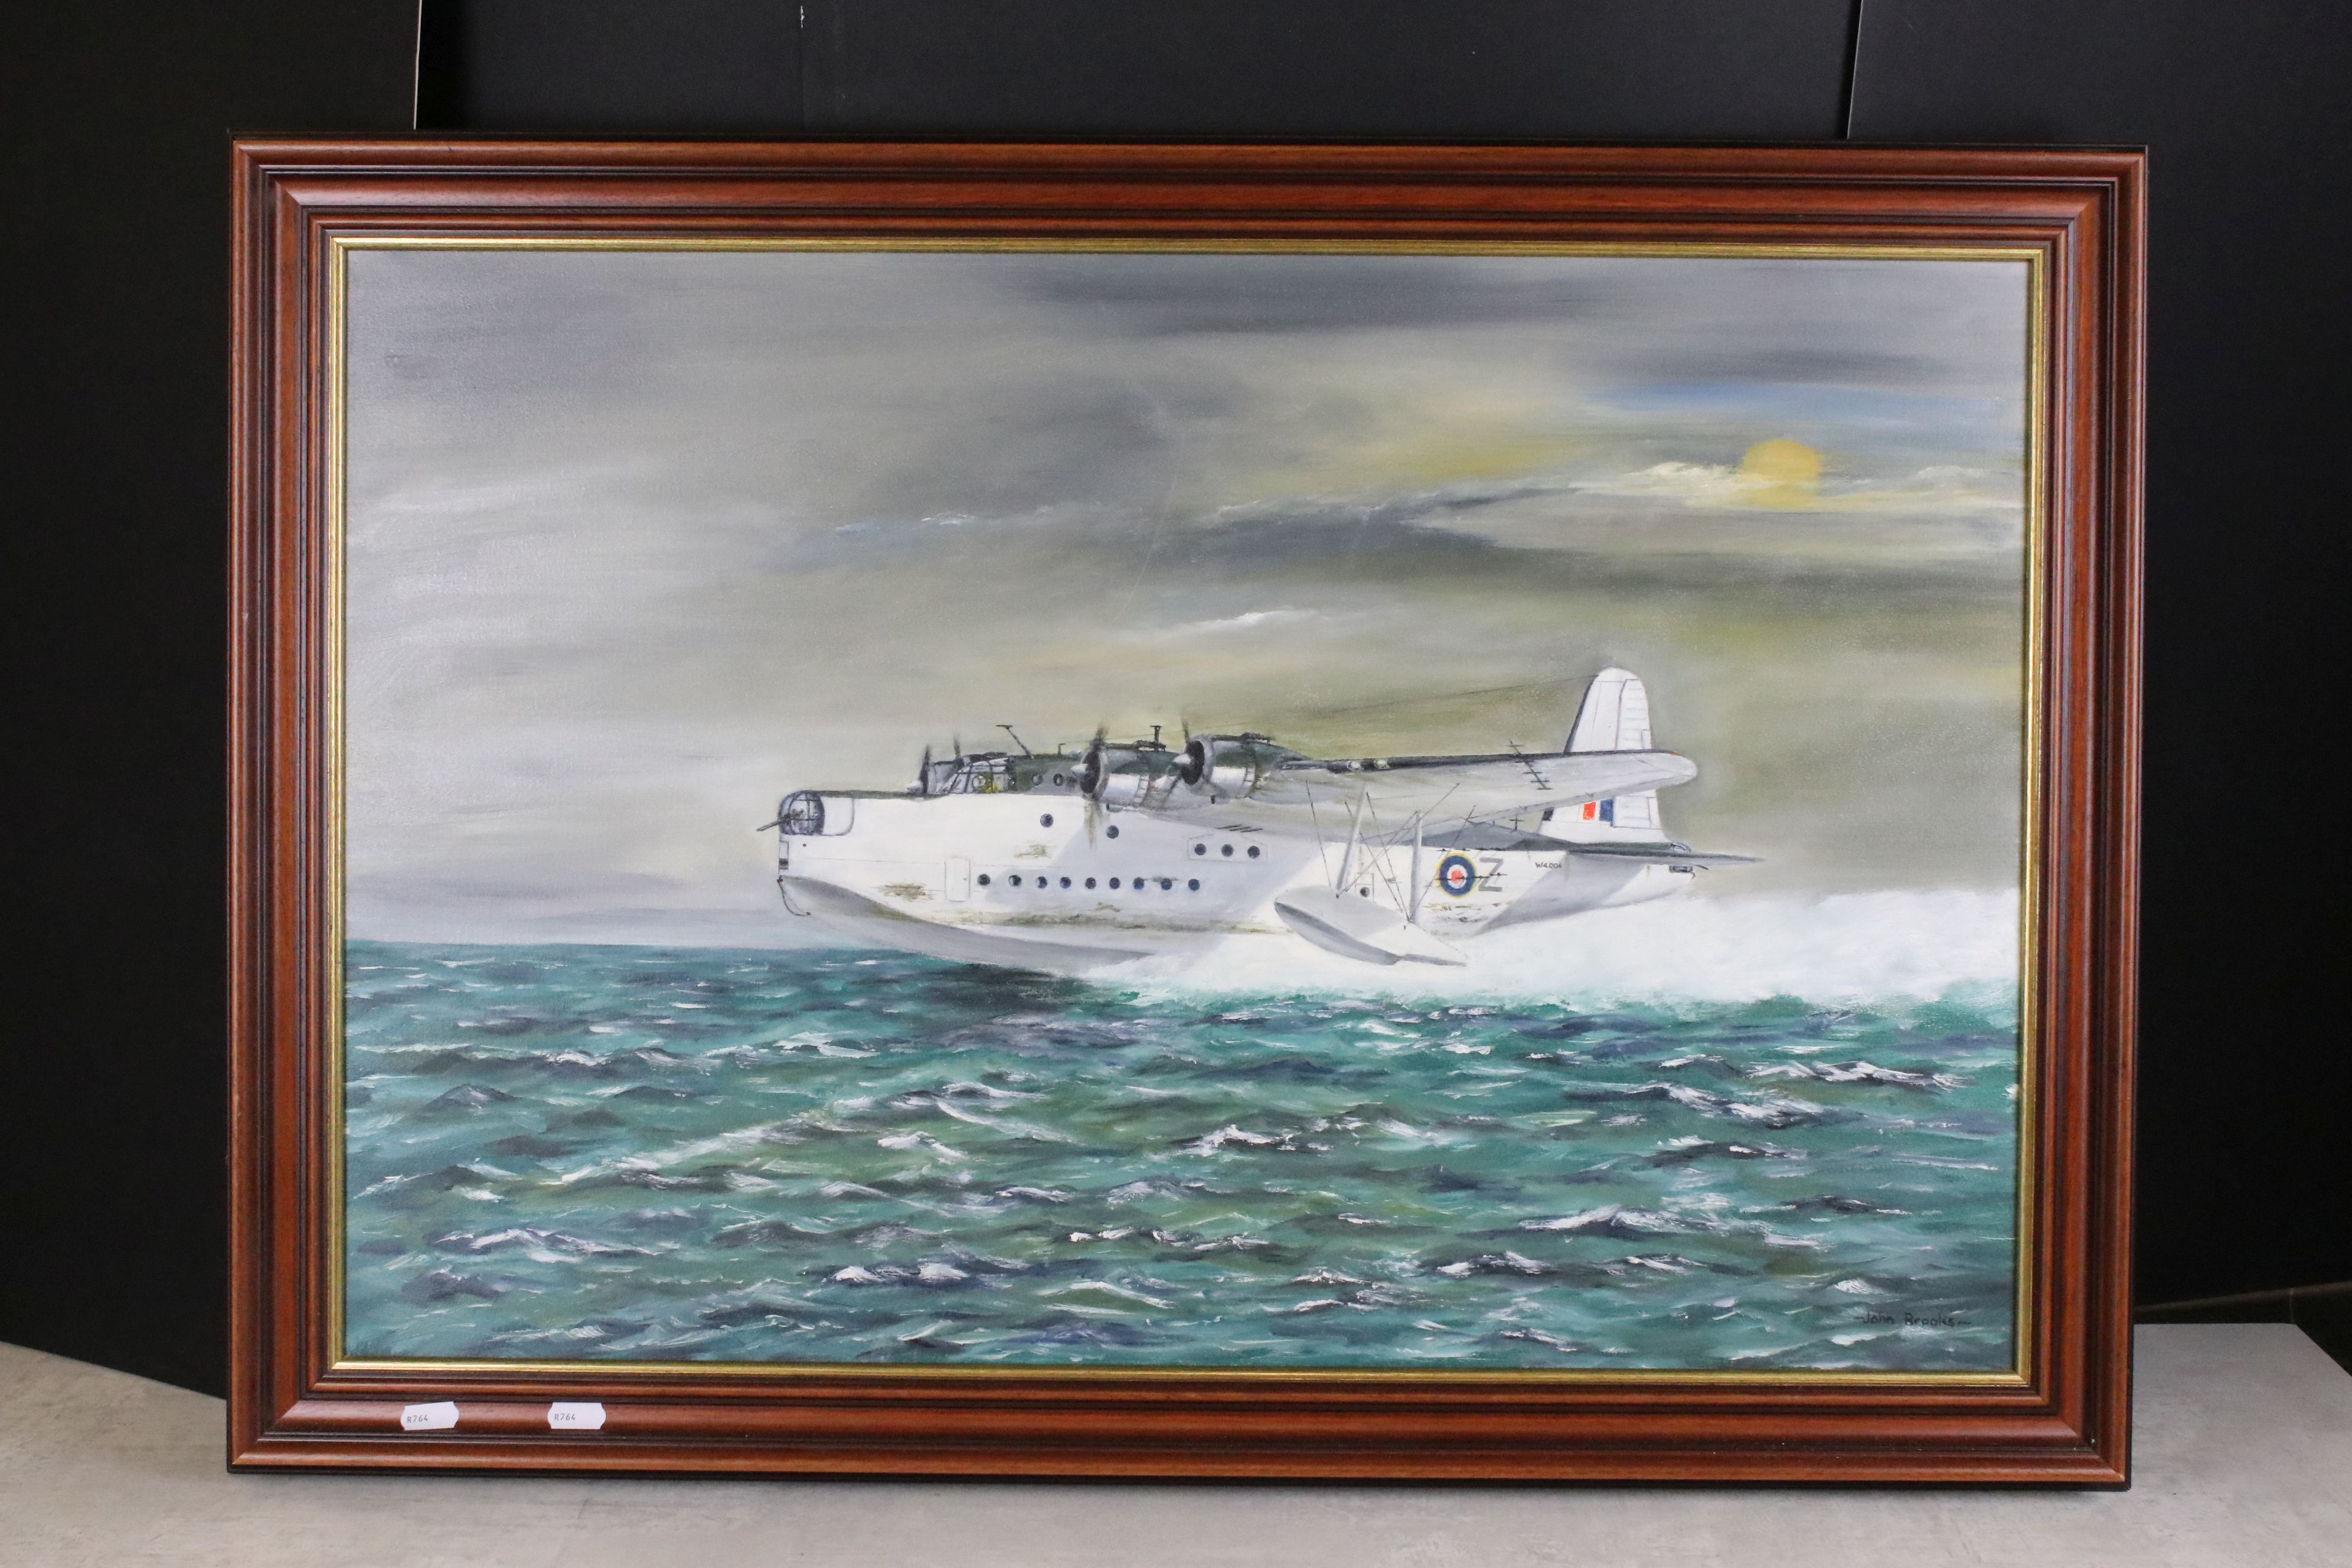 John Brooks (20th century) Oil Painting on Canvas of a Sunderland Flying Boat, signed lower right, - Image 7 of 12